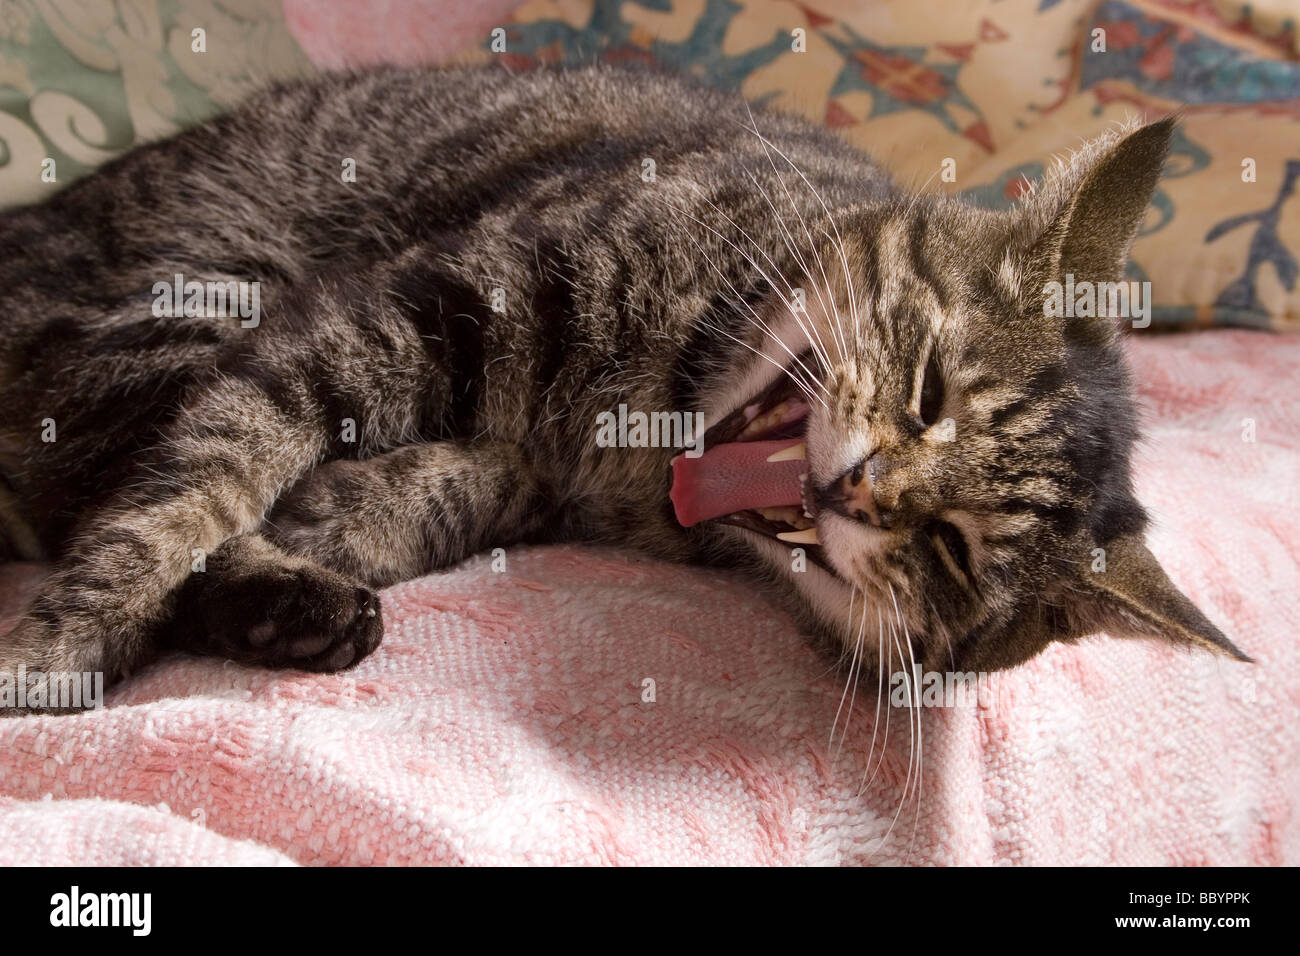 adult tabby cat rolling and bearing teeth Stock Photo